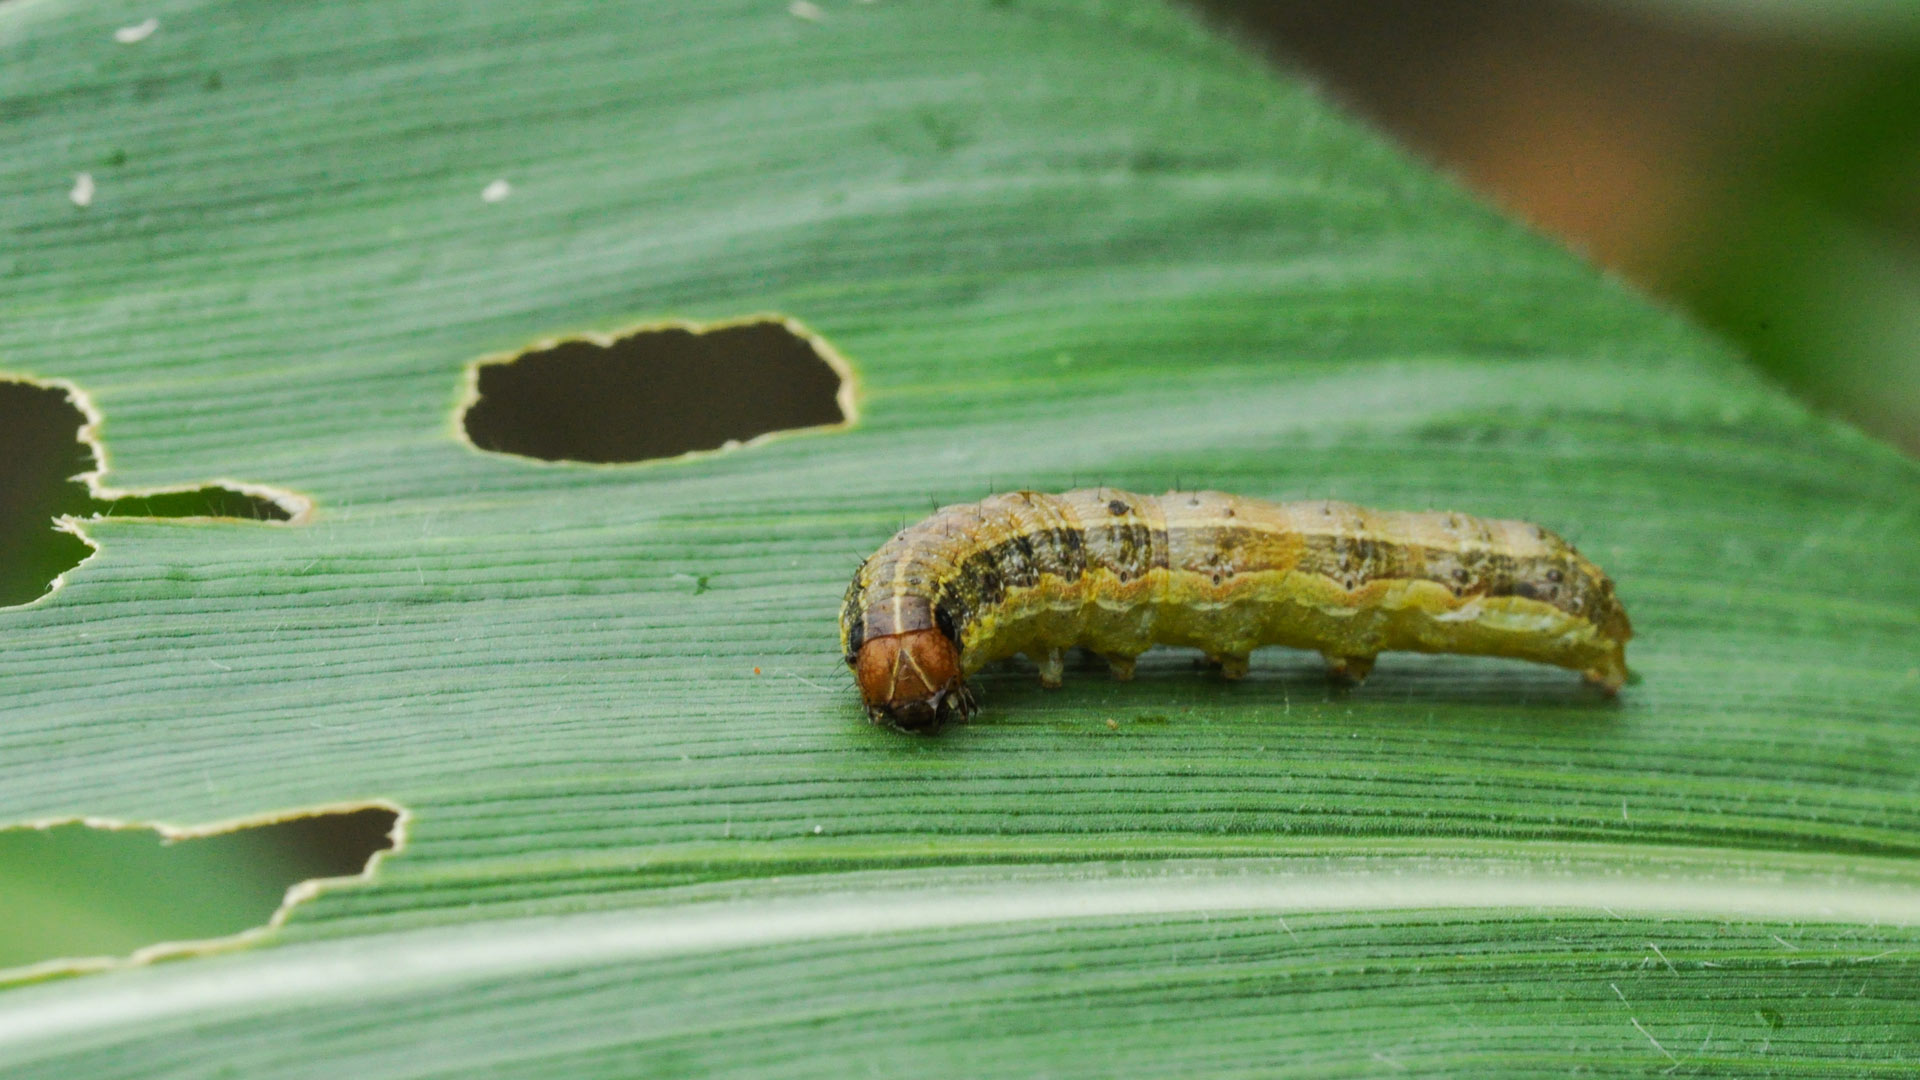 An armyworm found eating grass blade in a lawn in China Spring, TX.